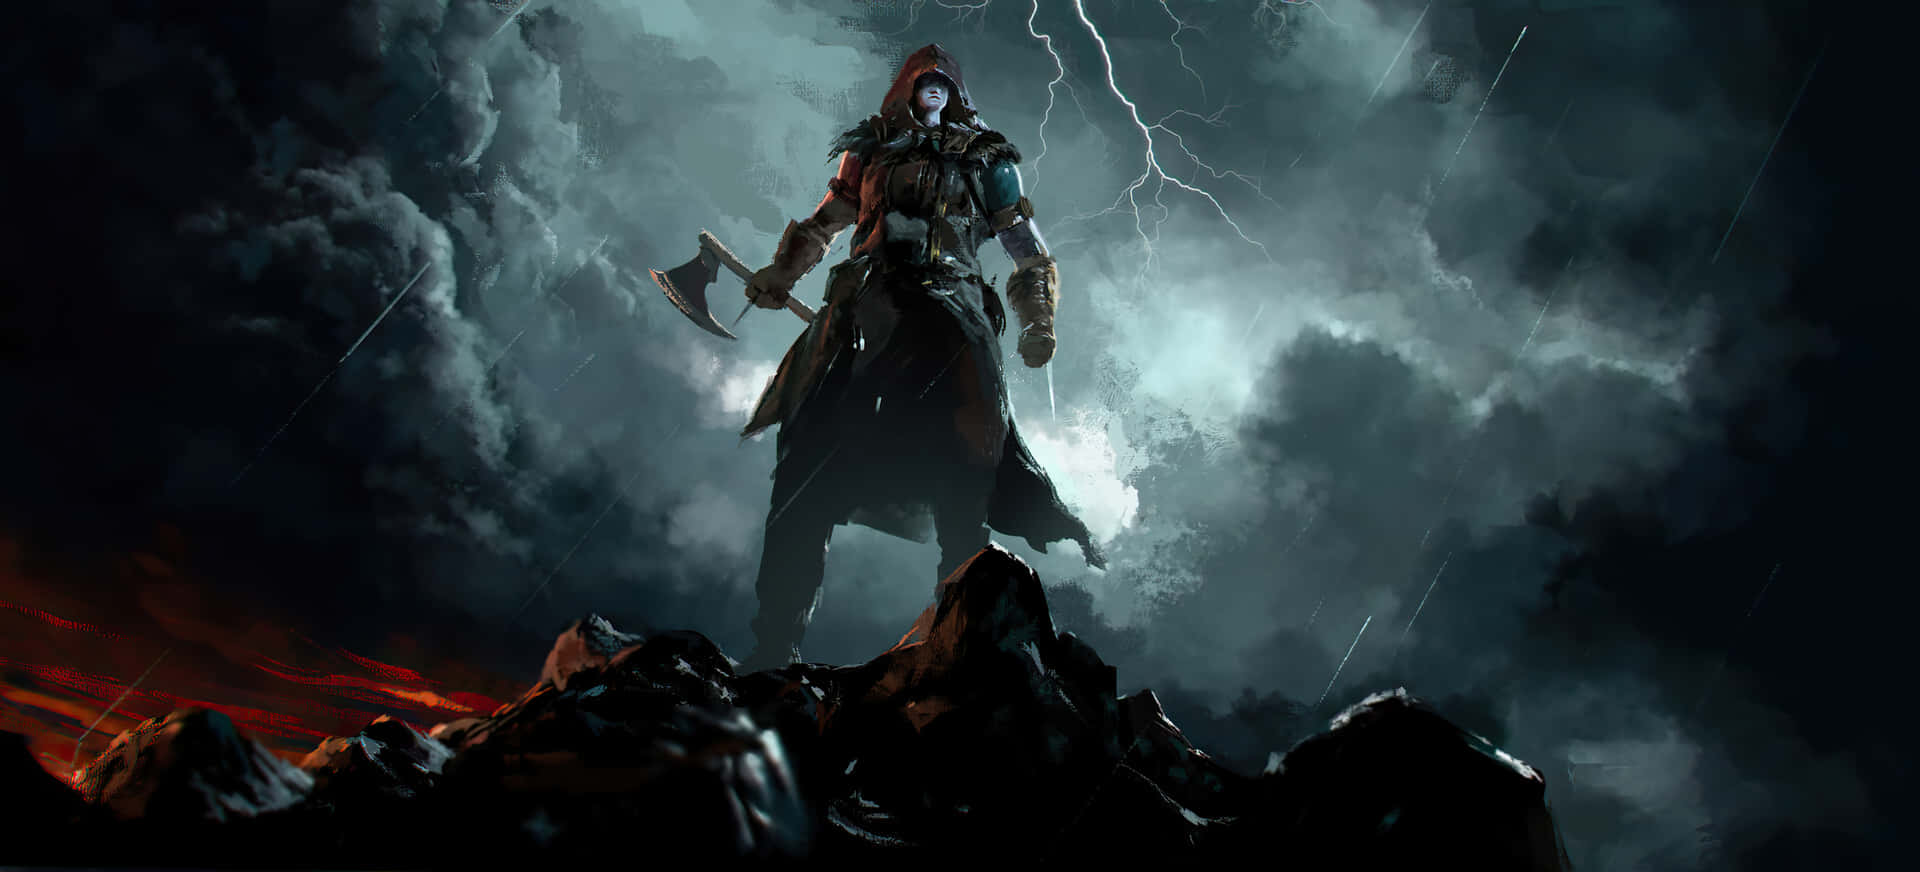 A Man Standing On A Mountain With Lightning Background